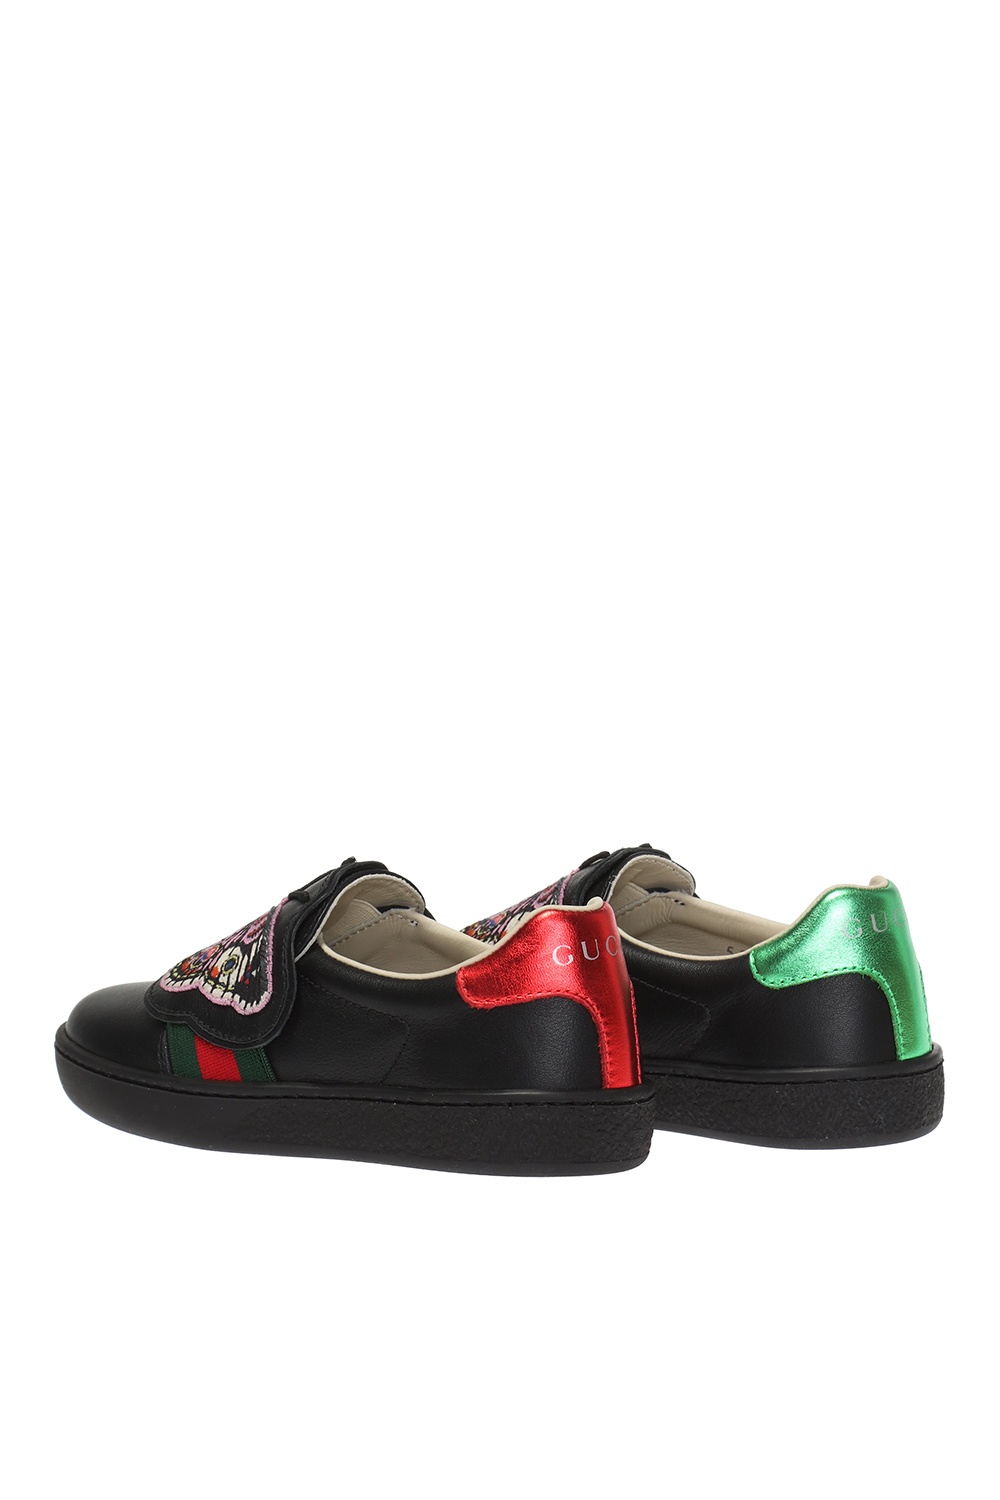 gucci butterfly sneakers